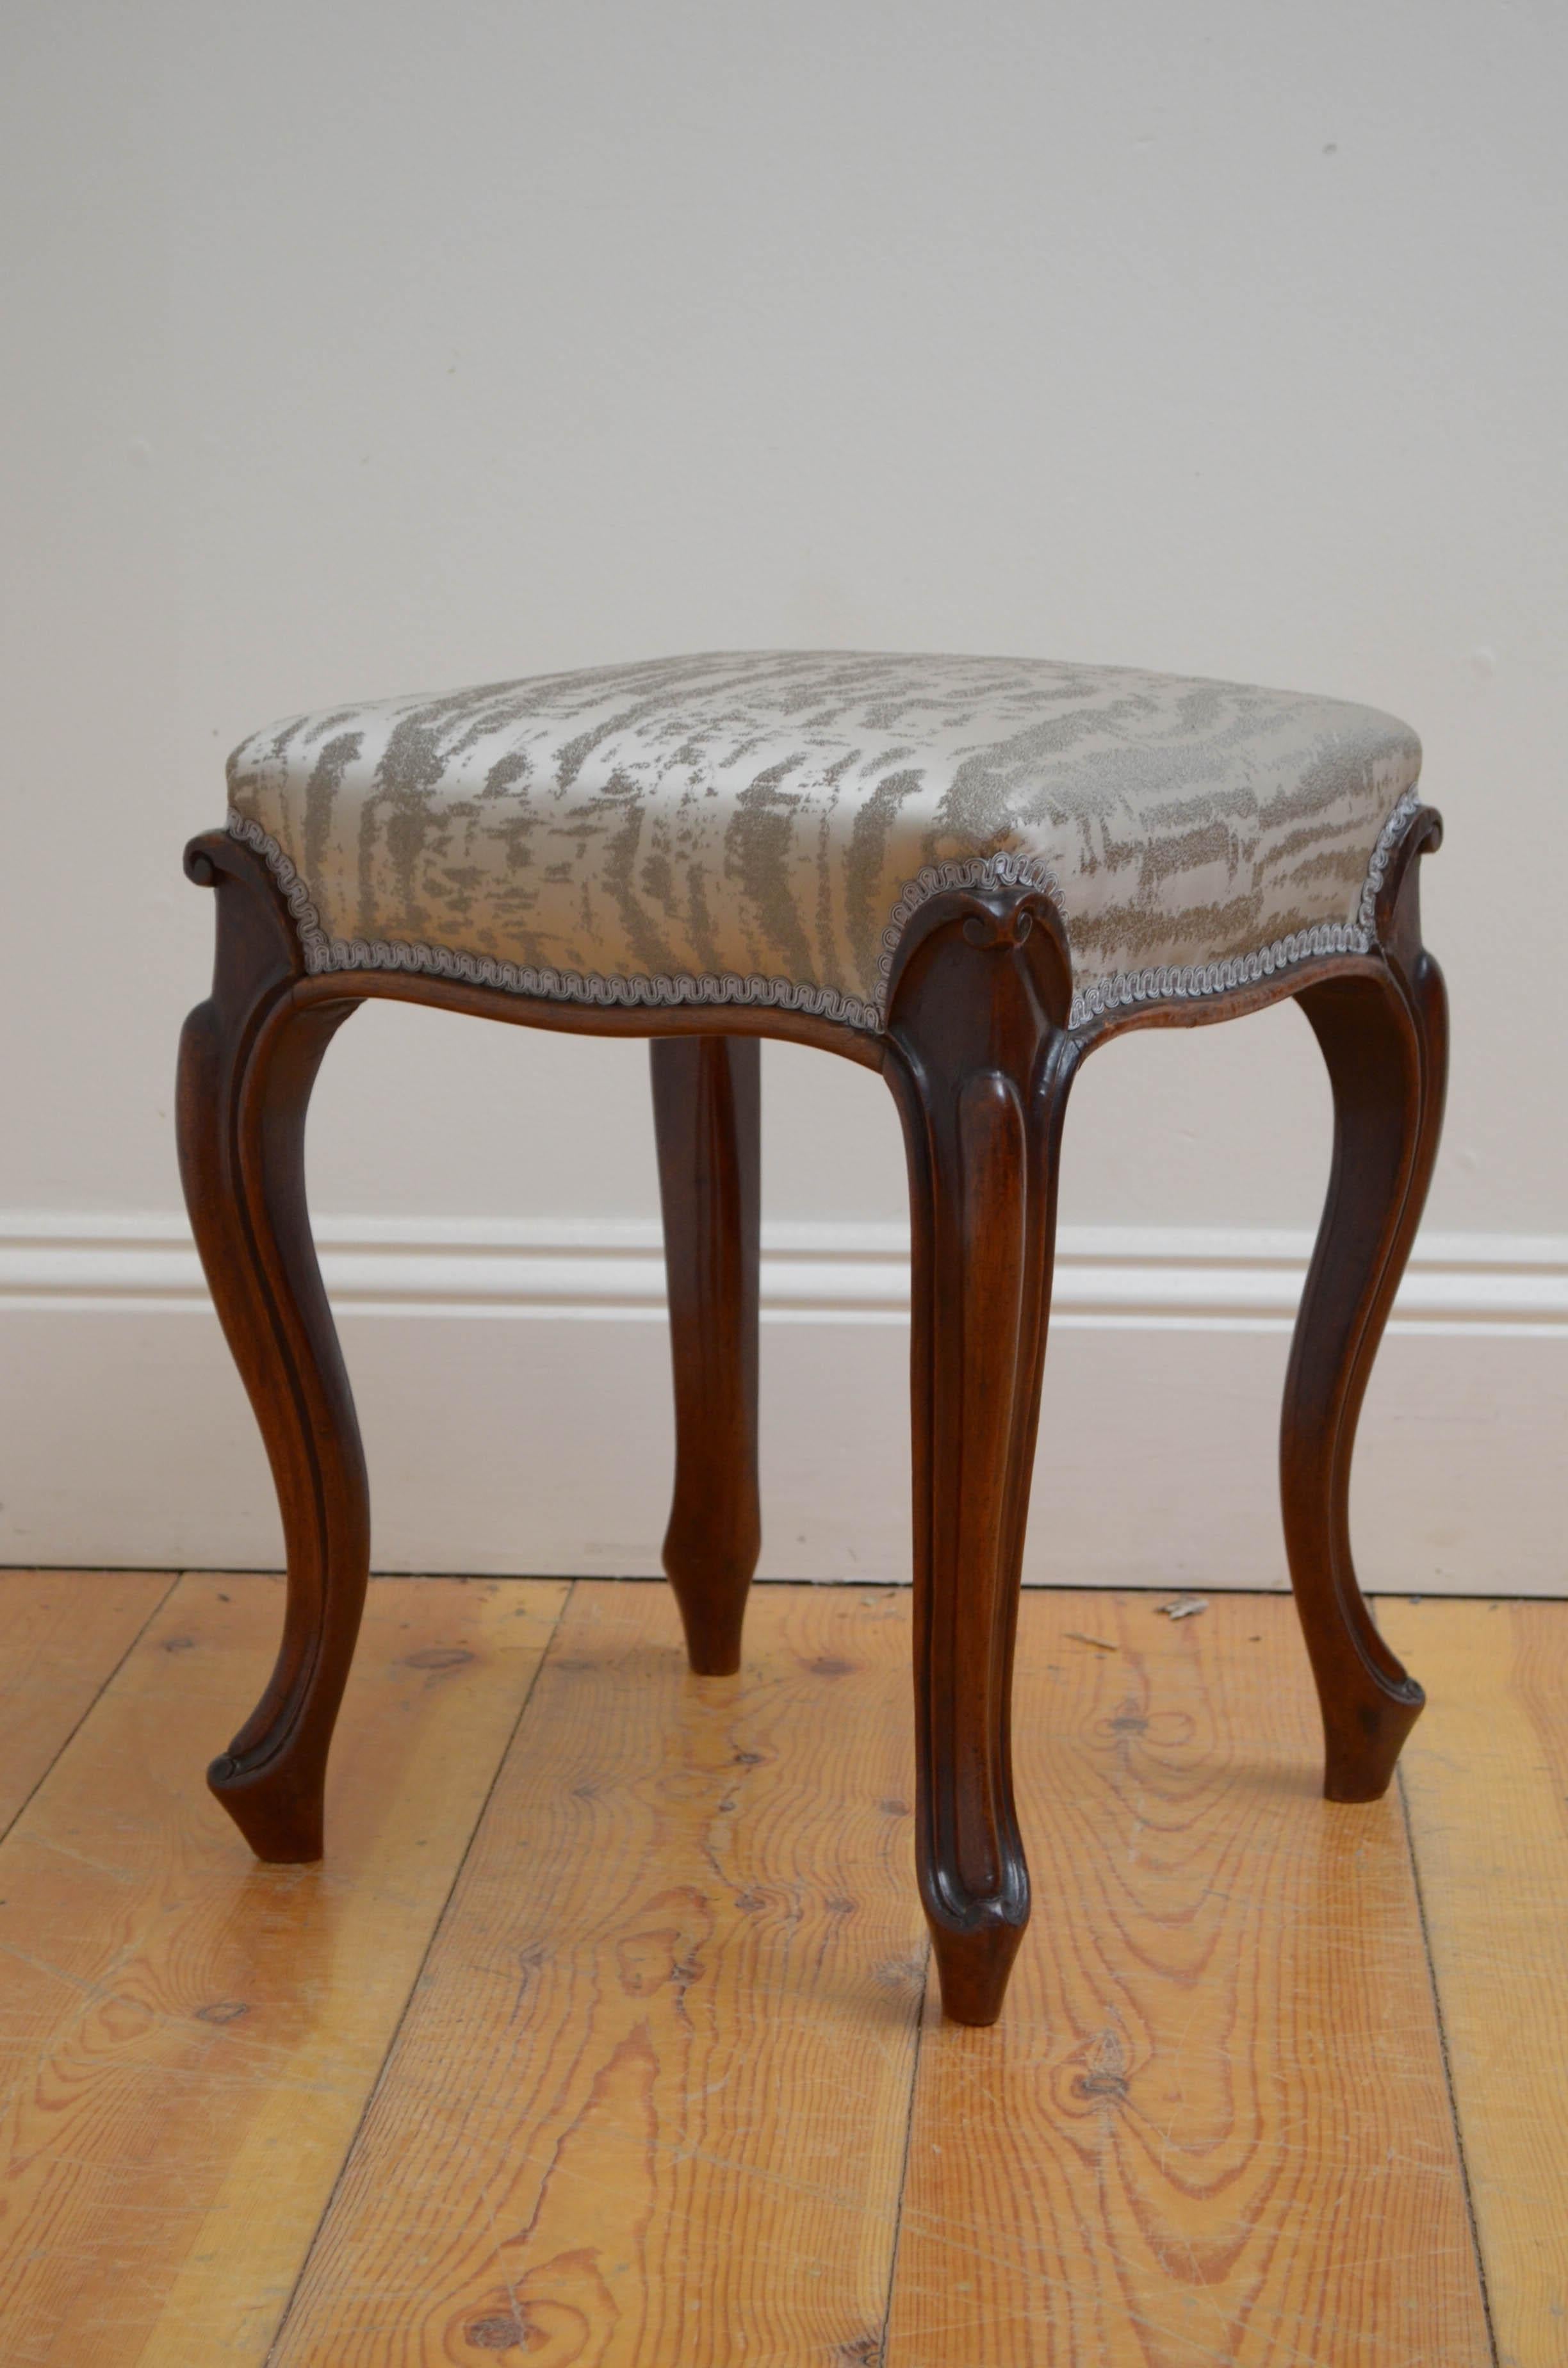 Fine Victorian dressing table stool in mahogany, having newly upholstered seat with silver top cover and four carved cabriole legs united by serpentine moulding. This antique stool retains its original finish which has been revived and waxed,